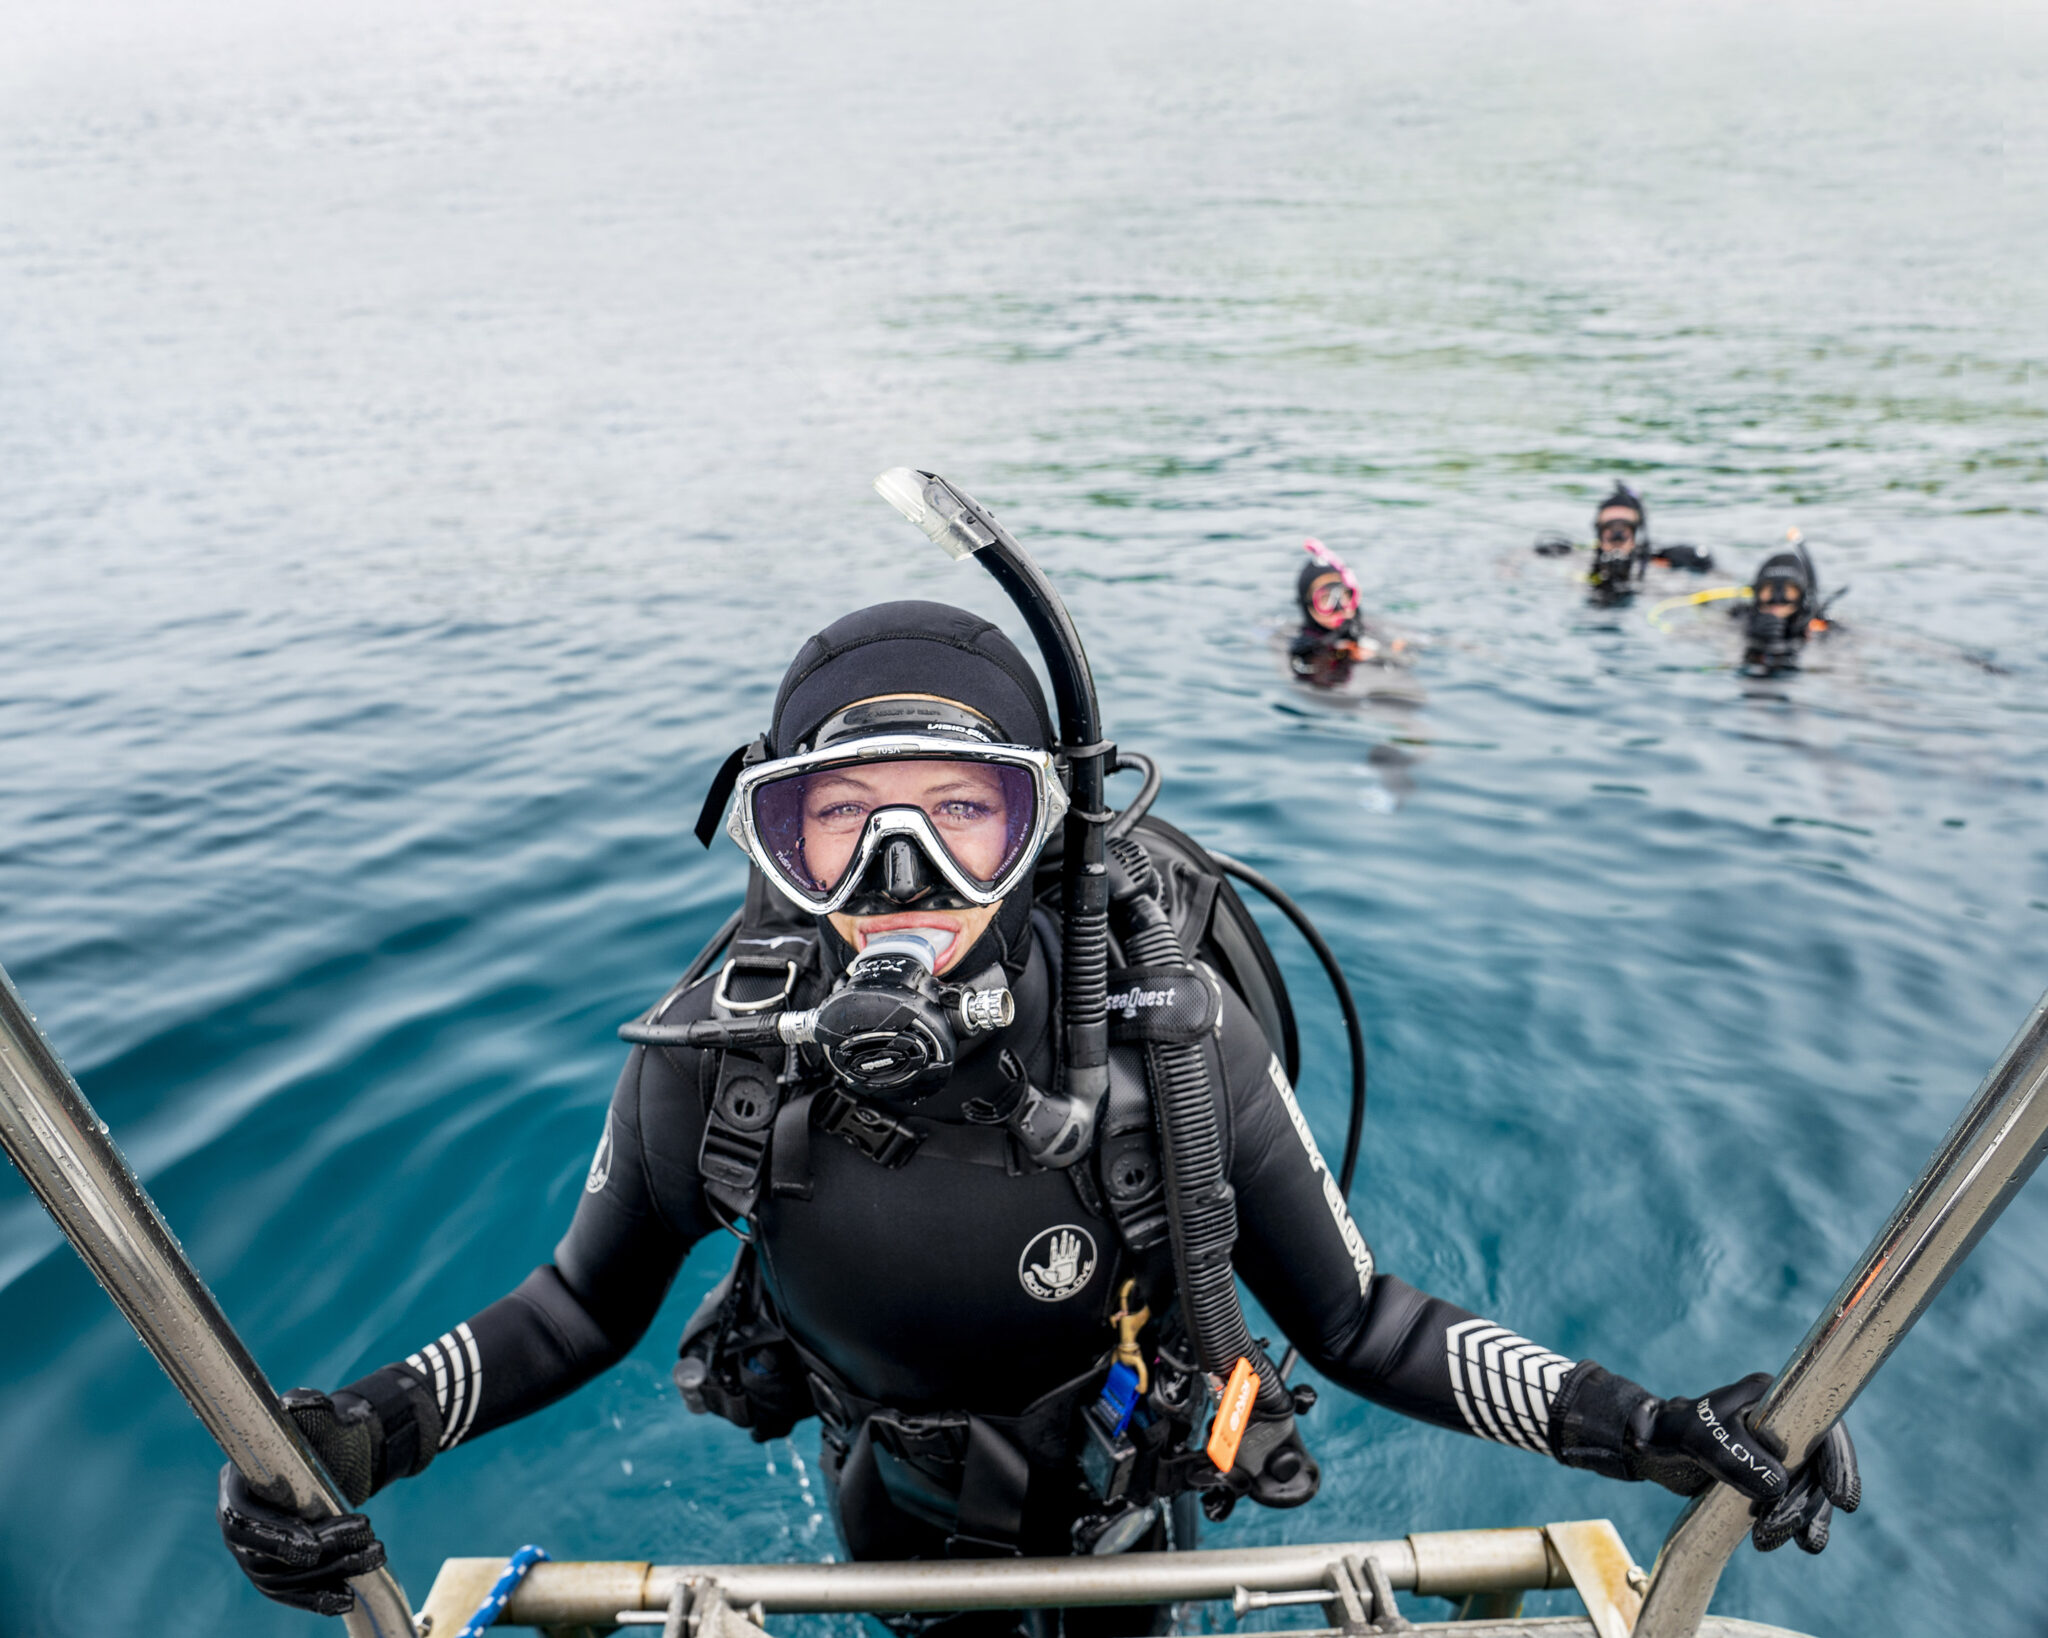 A woman climbs out of the water wearing scuba gear in new zealand